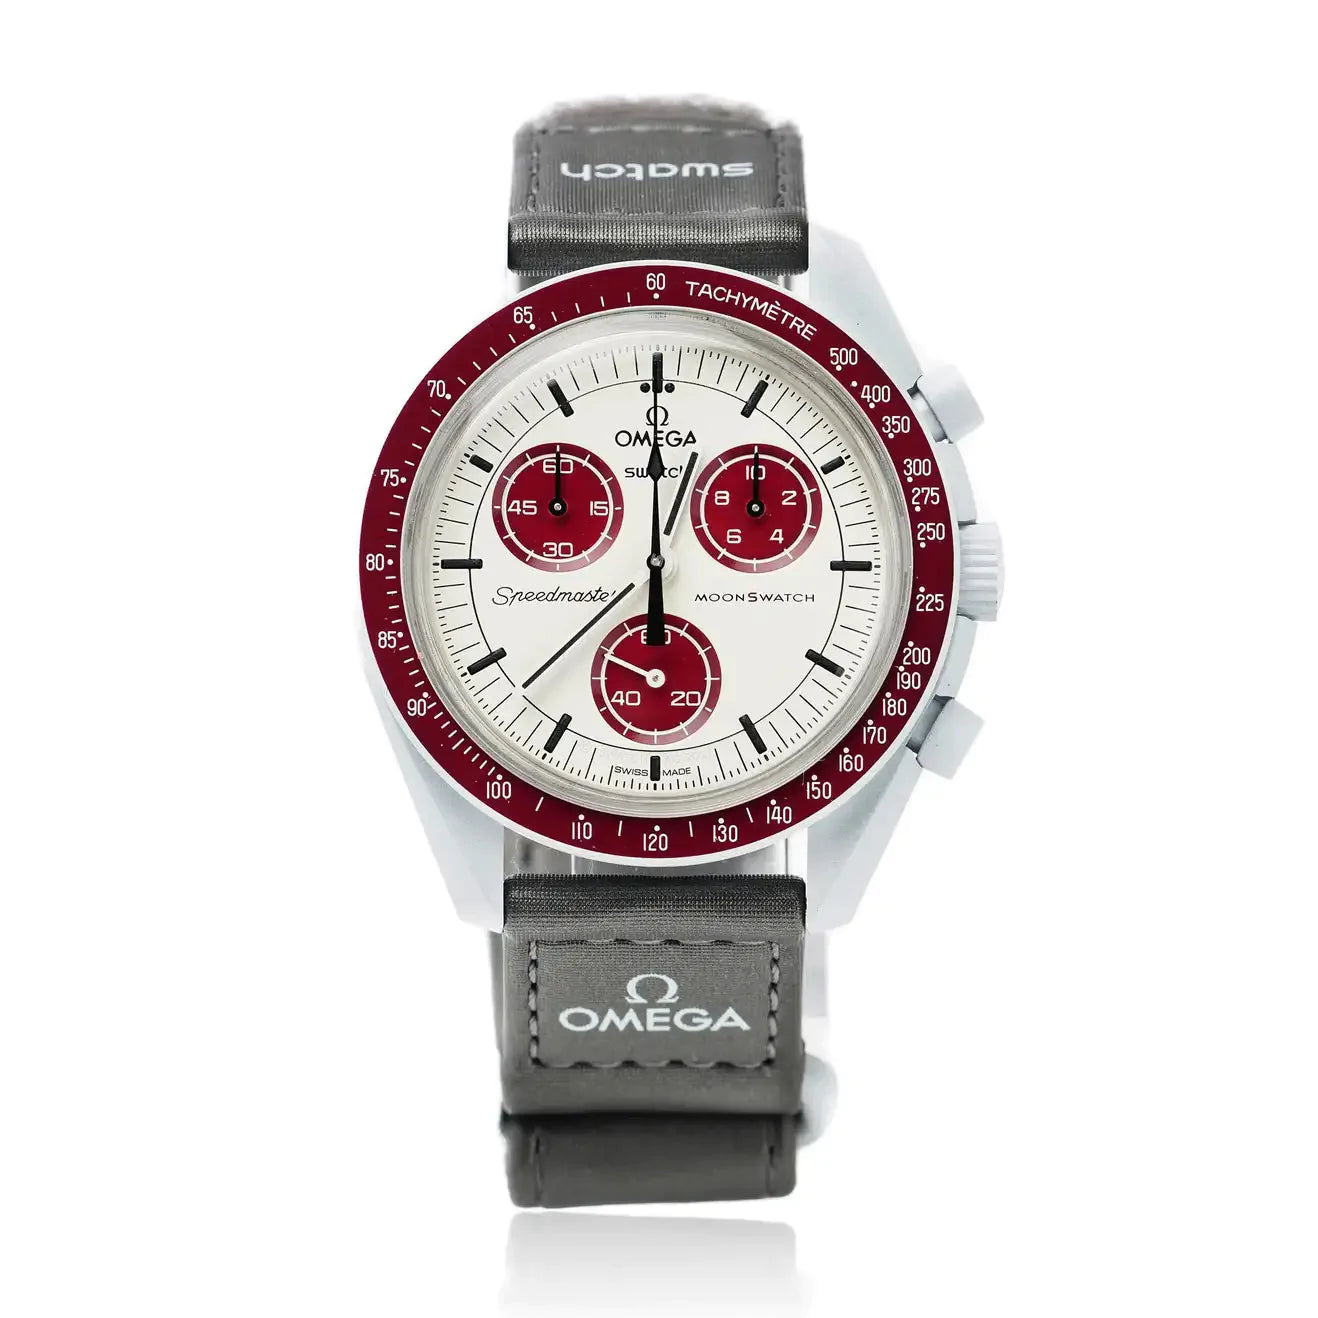 Omega Swatch 'Speeedmaster' 'Mission to Pluto' Mens Watch(AVAILABLE ONLINE)